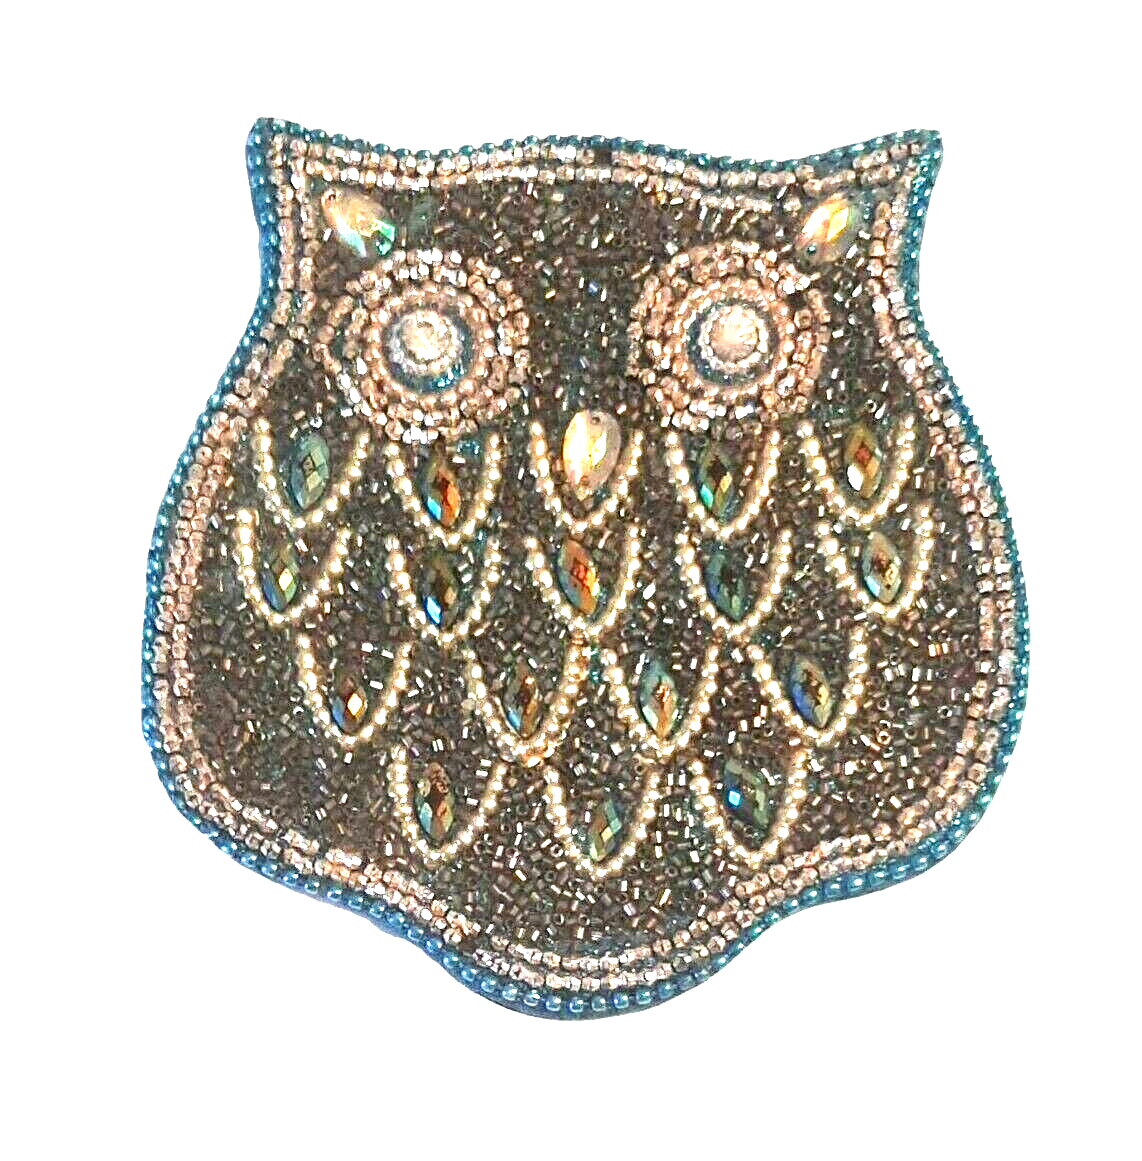 Jeweled and Beaded Owl Shaped Coaster Bling Teal Gold Pier 1 - $15.86